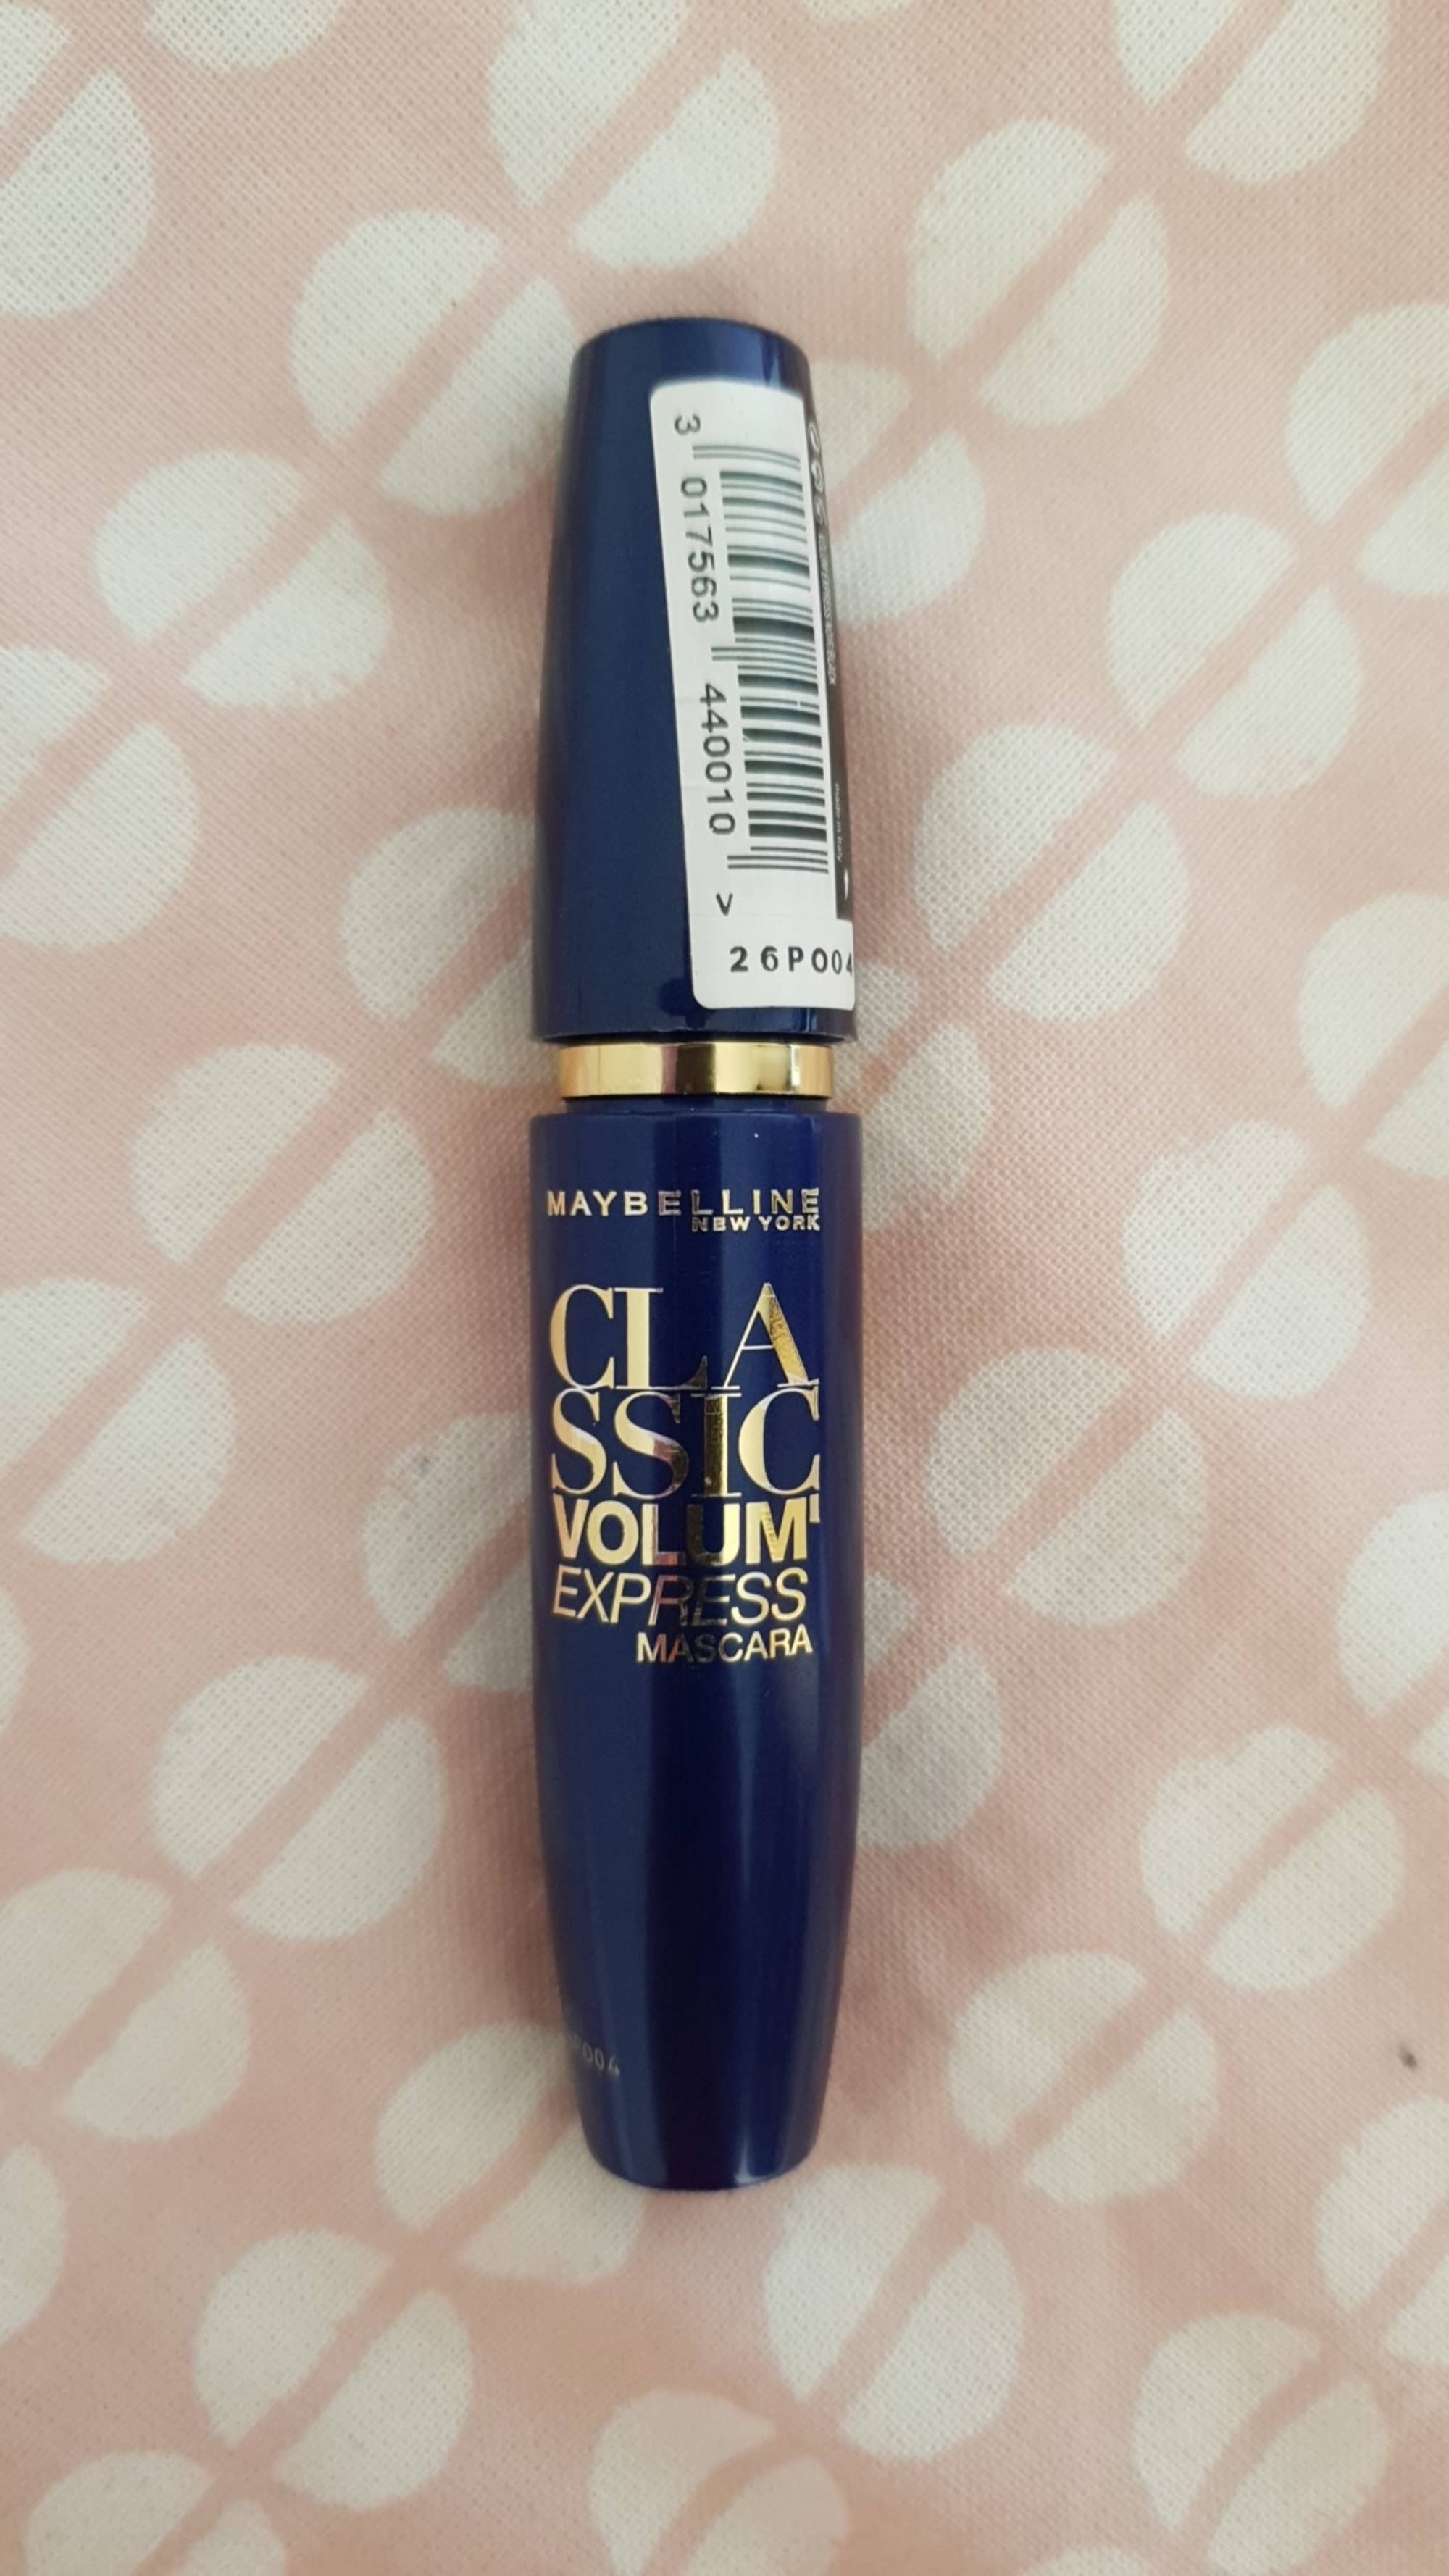 MAYBELLINE - Classic volume expres mascara